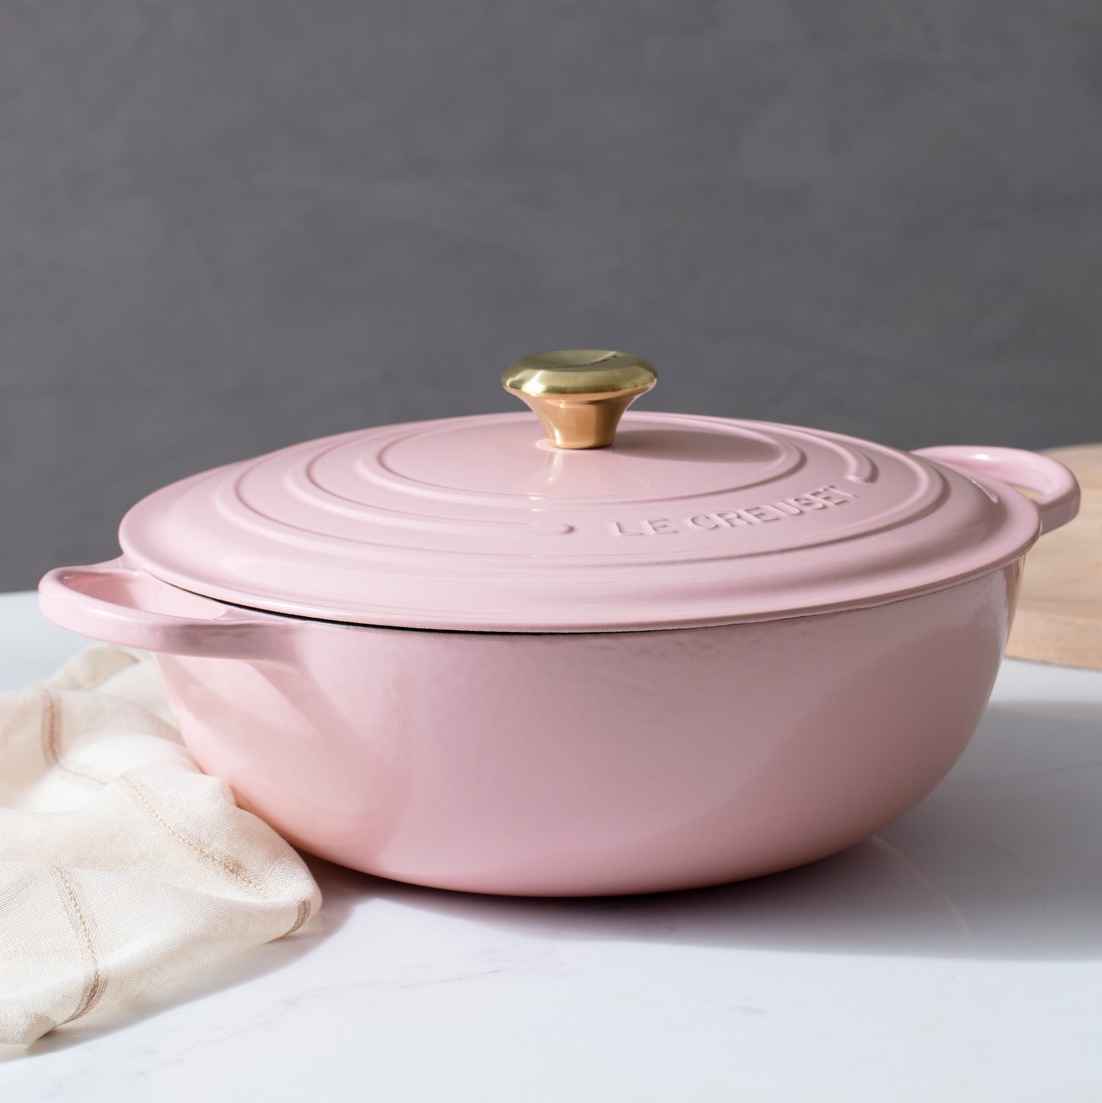 kamera Industriel spontan Le Creuset on Twitter: "A sweet statement. 💖 Sloped sides and a generous  capacity make the Signature Soup Pot a kitchen essential, and Chiffon Pink  brings a delicate touch to this useful